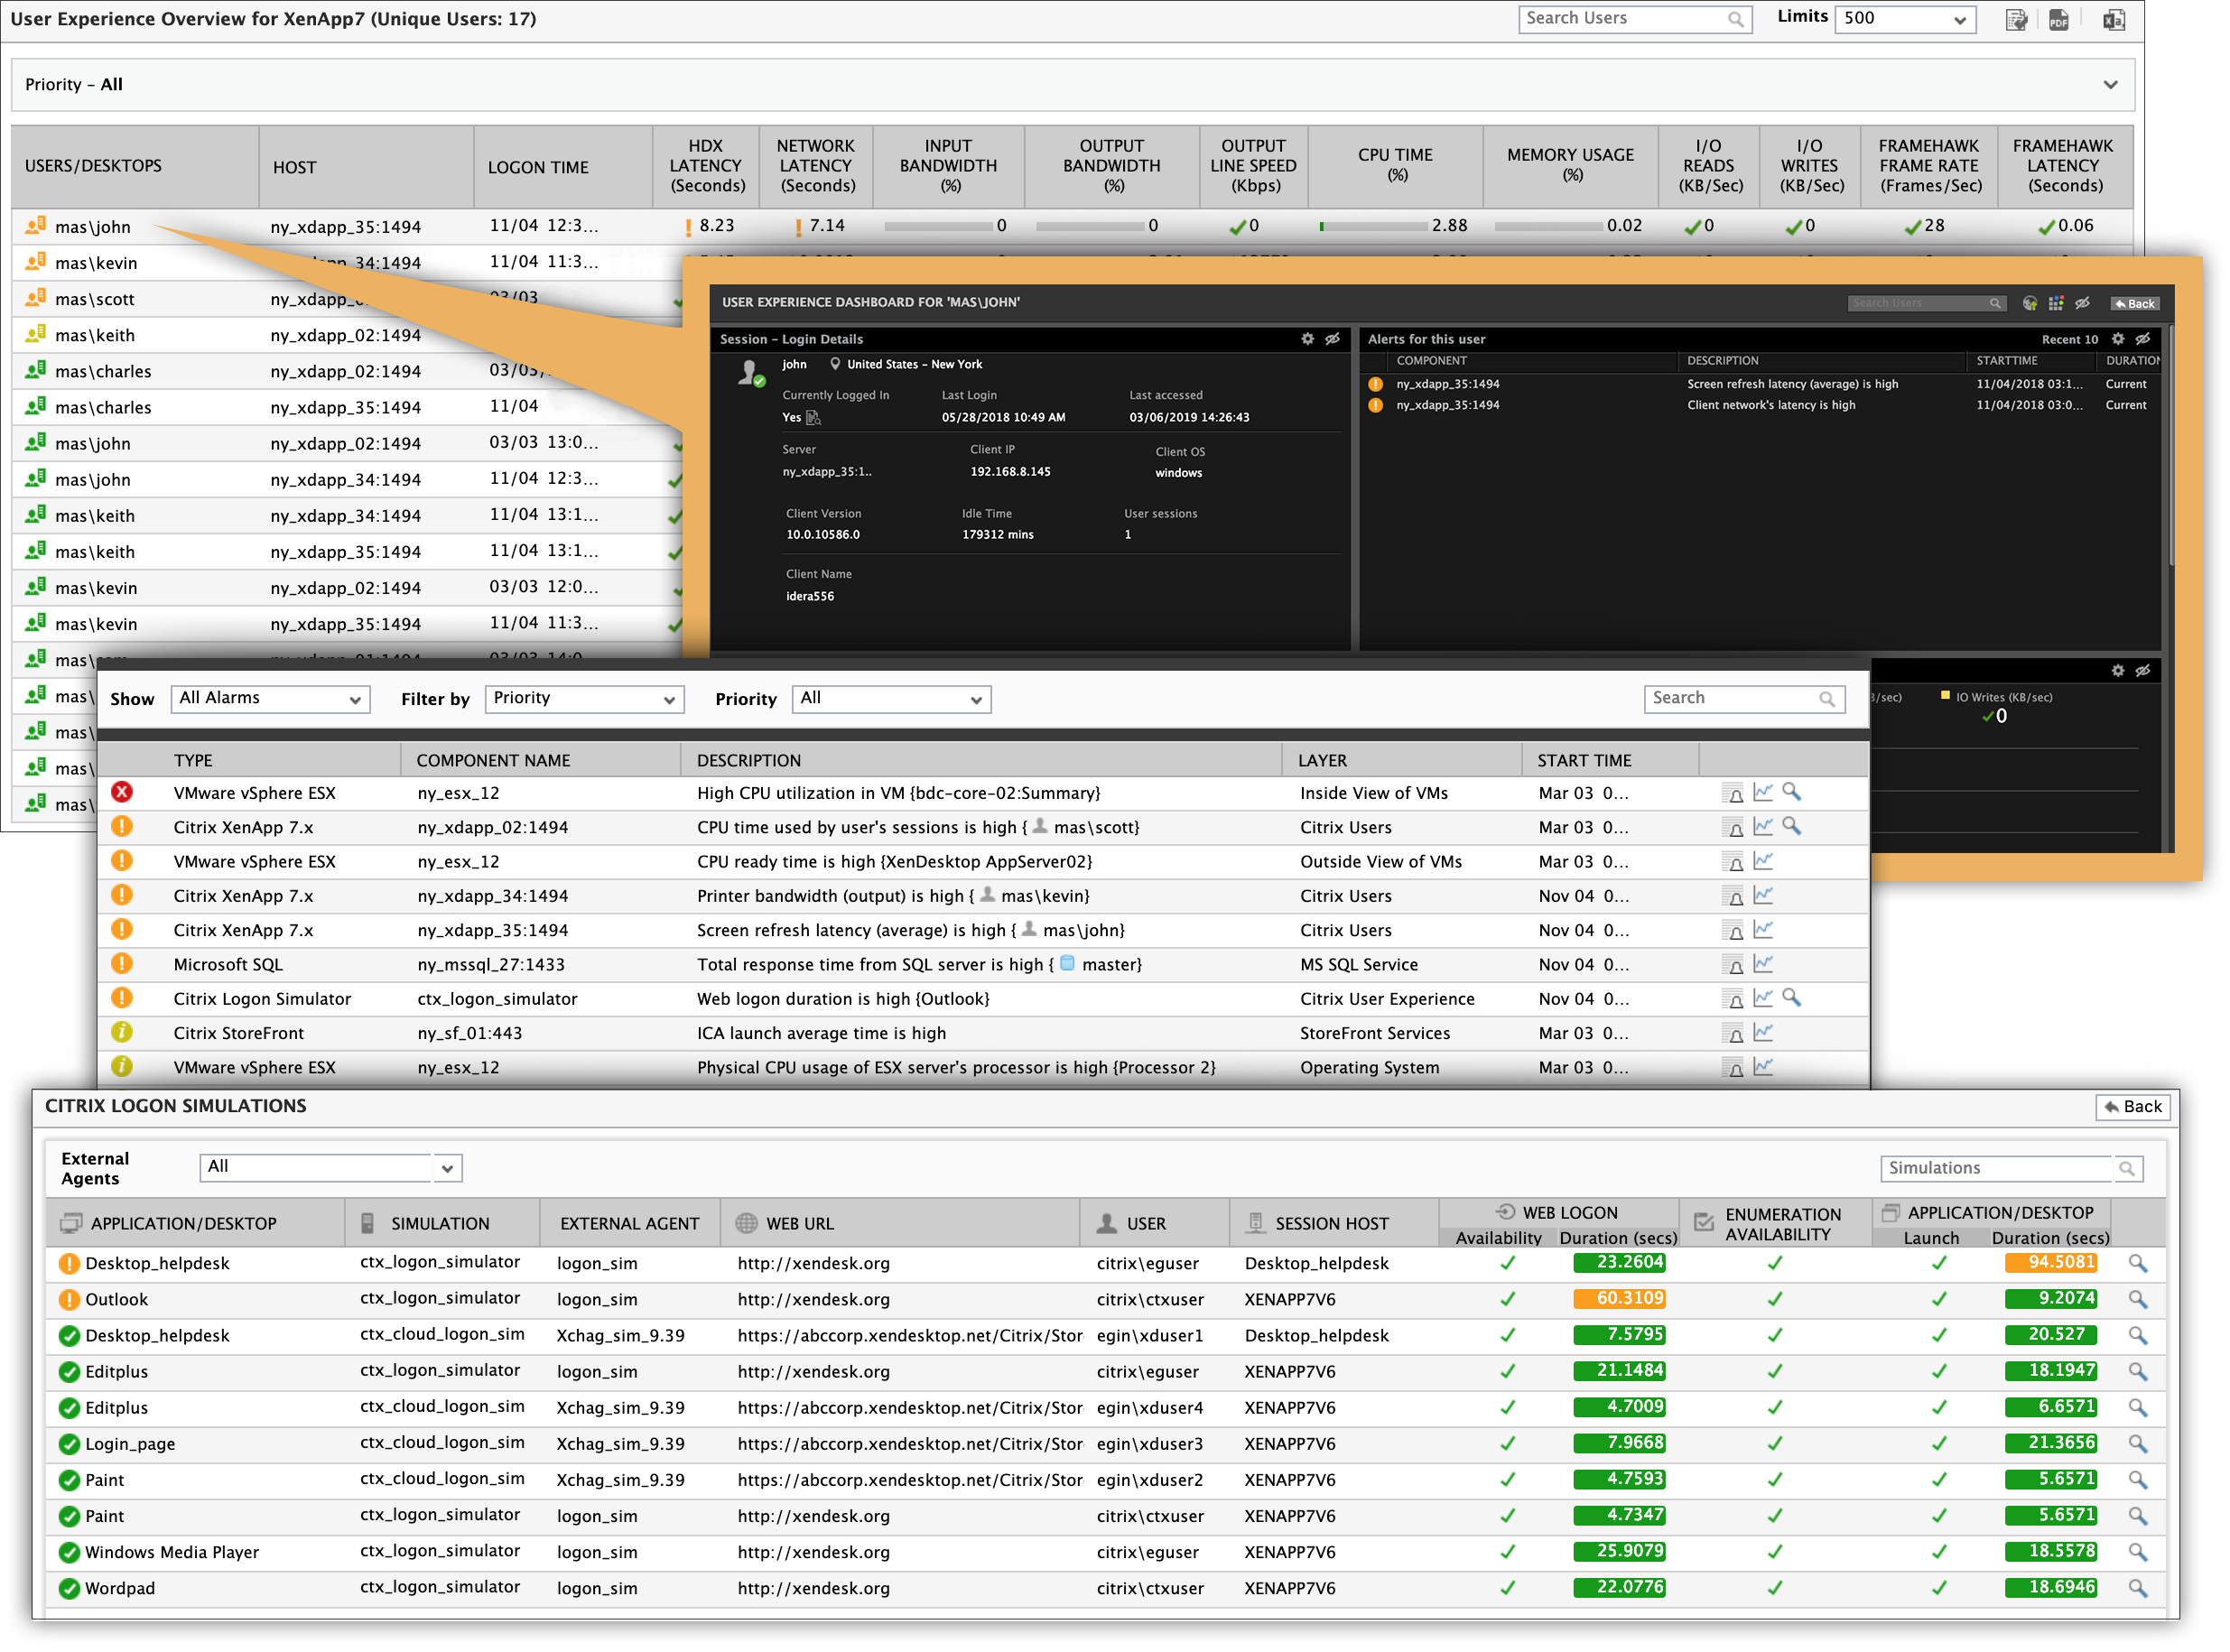 The Citrix Monitoring view used by Citrix management staff and administrators